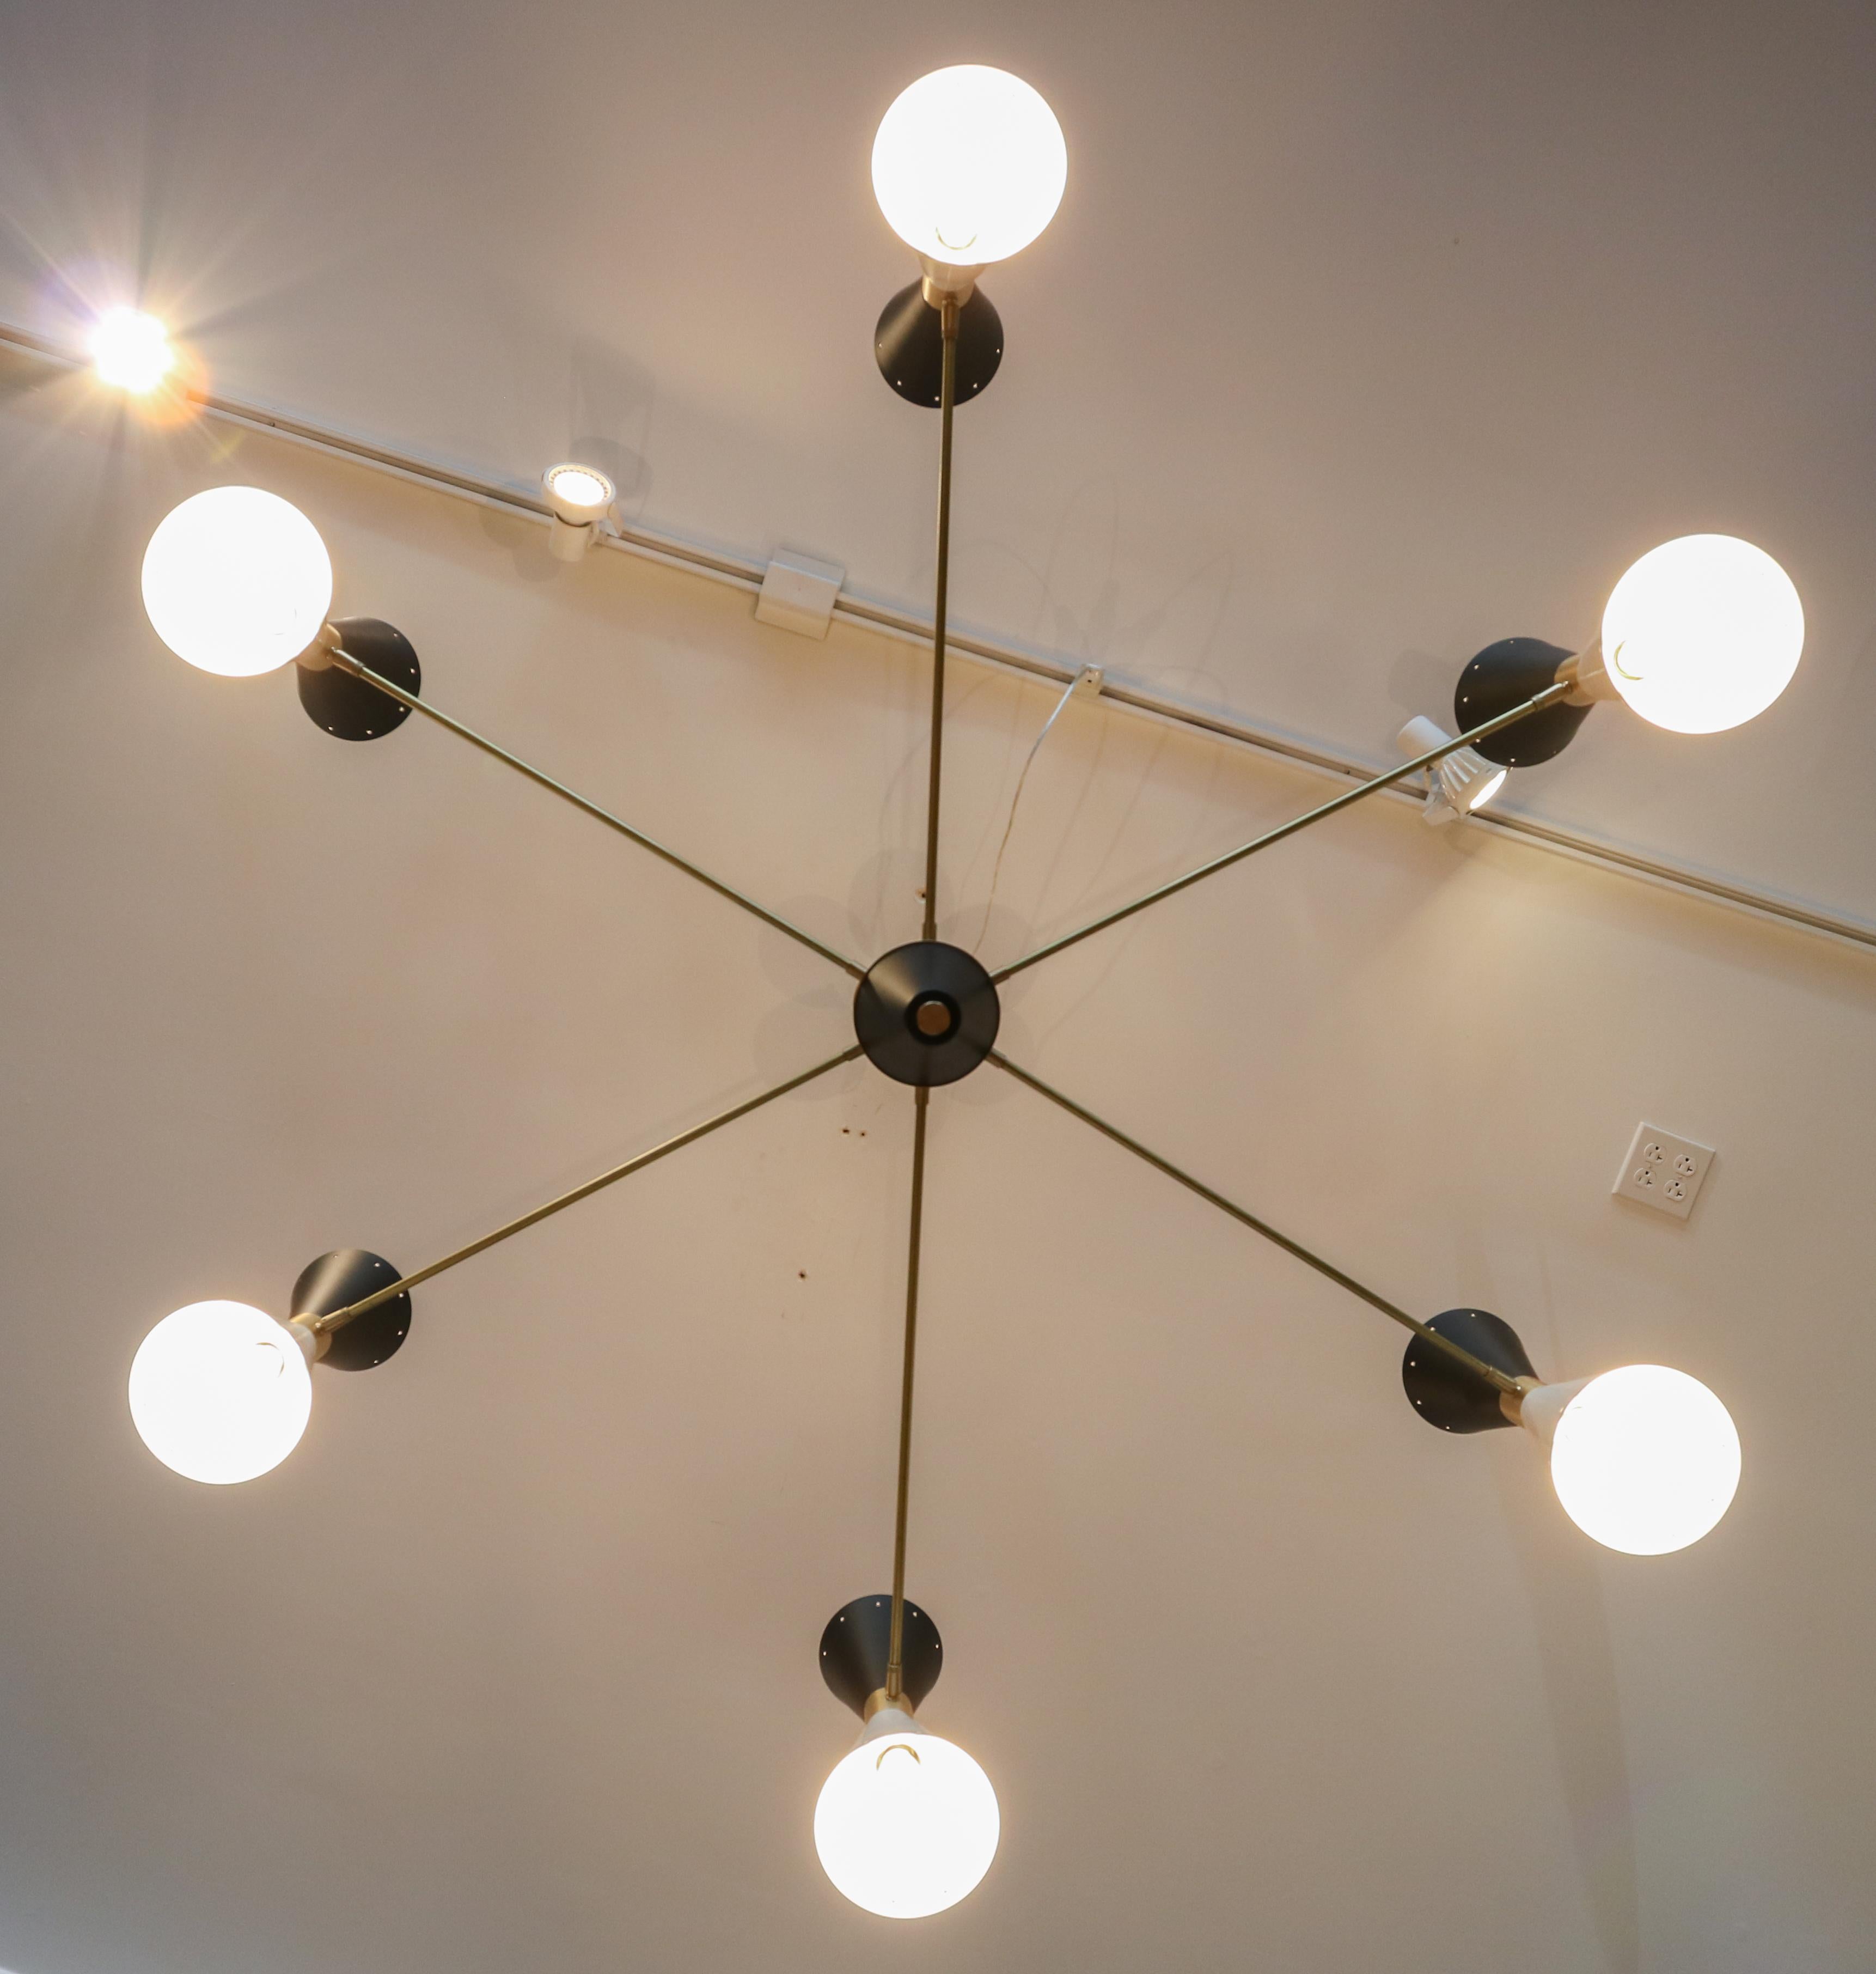 Custom Midcentury Style Brass, Black & White Metal Chandelier by Adesso Imports For Sale 2